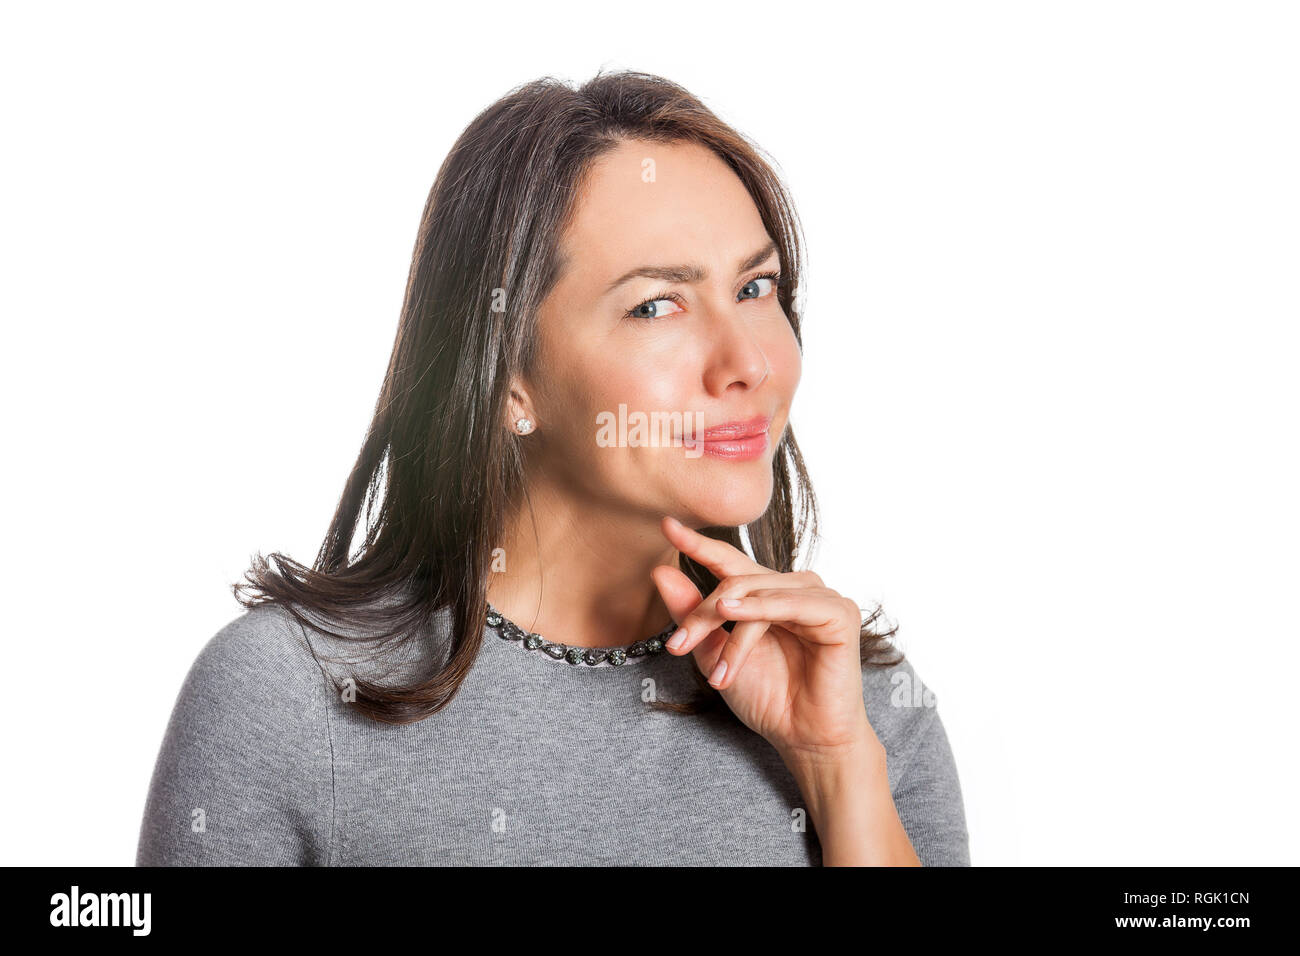 Young woman showing disbelief isolated on white background Stock Photo